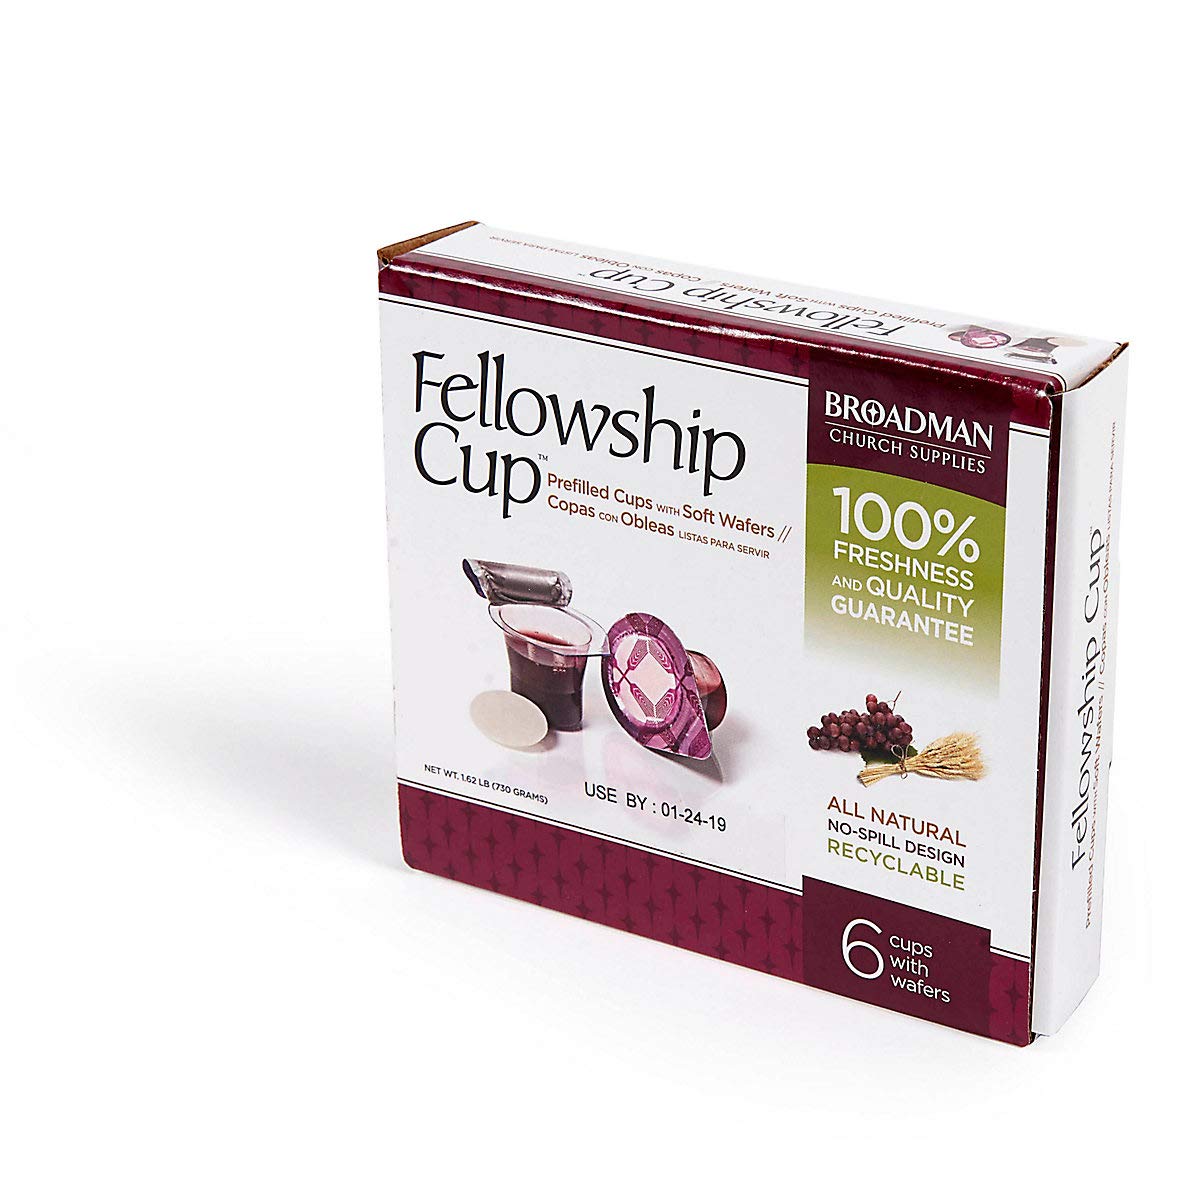 250 Count Prefilled Communion Fellowship Cups with Juice and Wafer claimedbygoddesigns